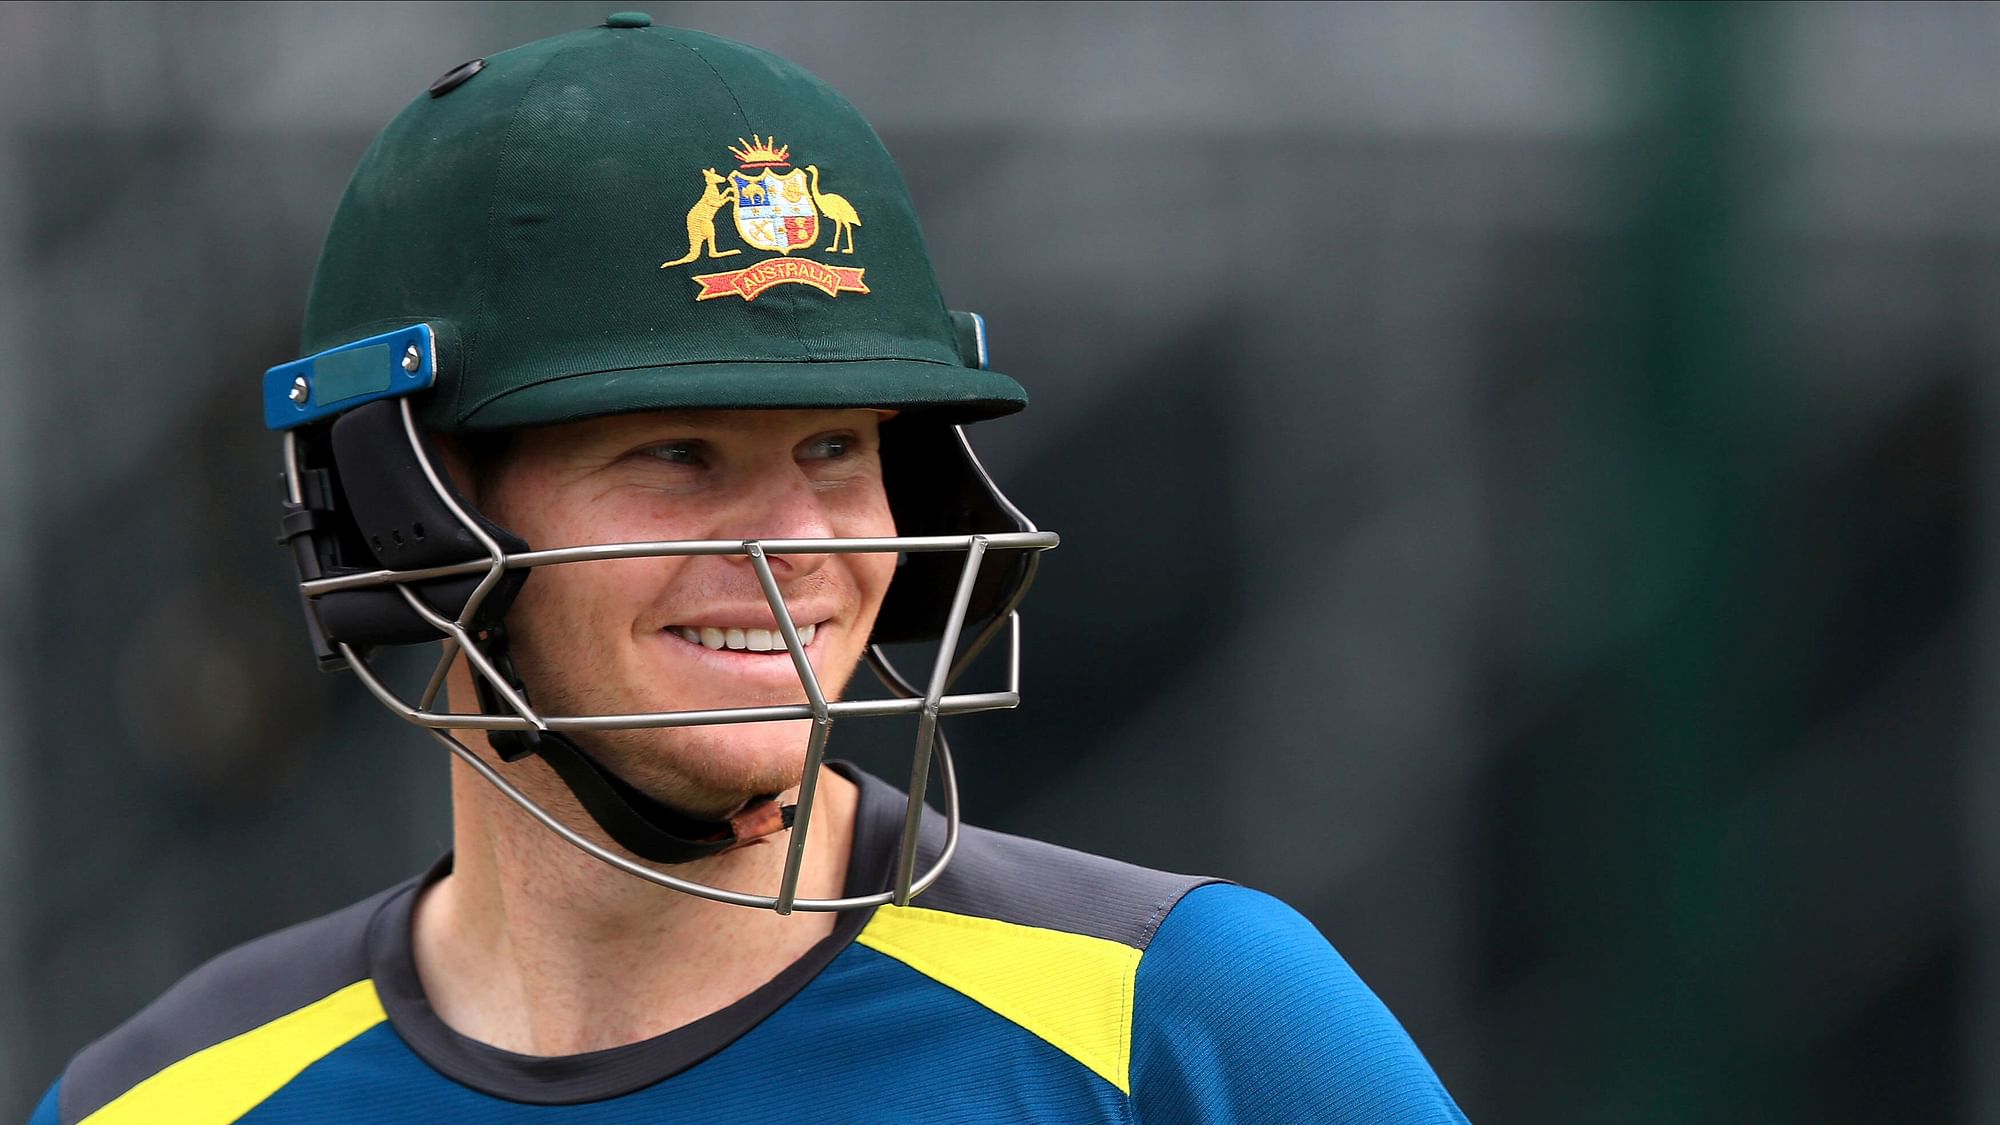 Steve Smith returns to the Australian team for the fourth Ashes cricket Test against England beginning on Wednesday at Old Trafford.